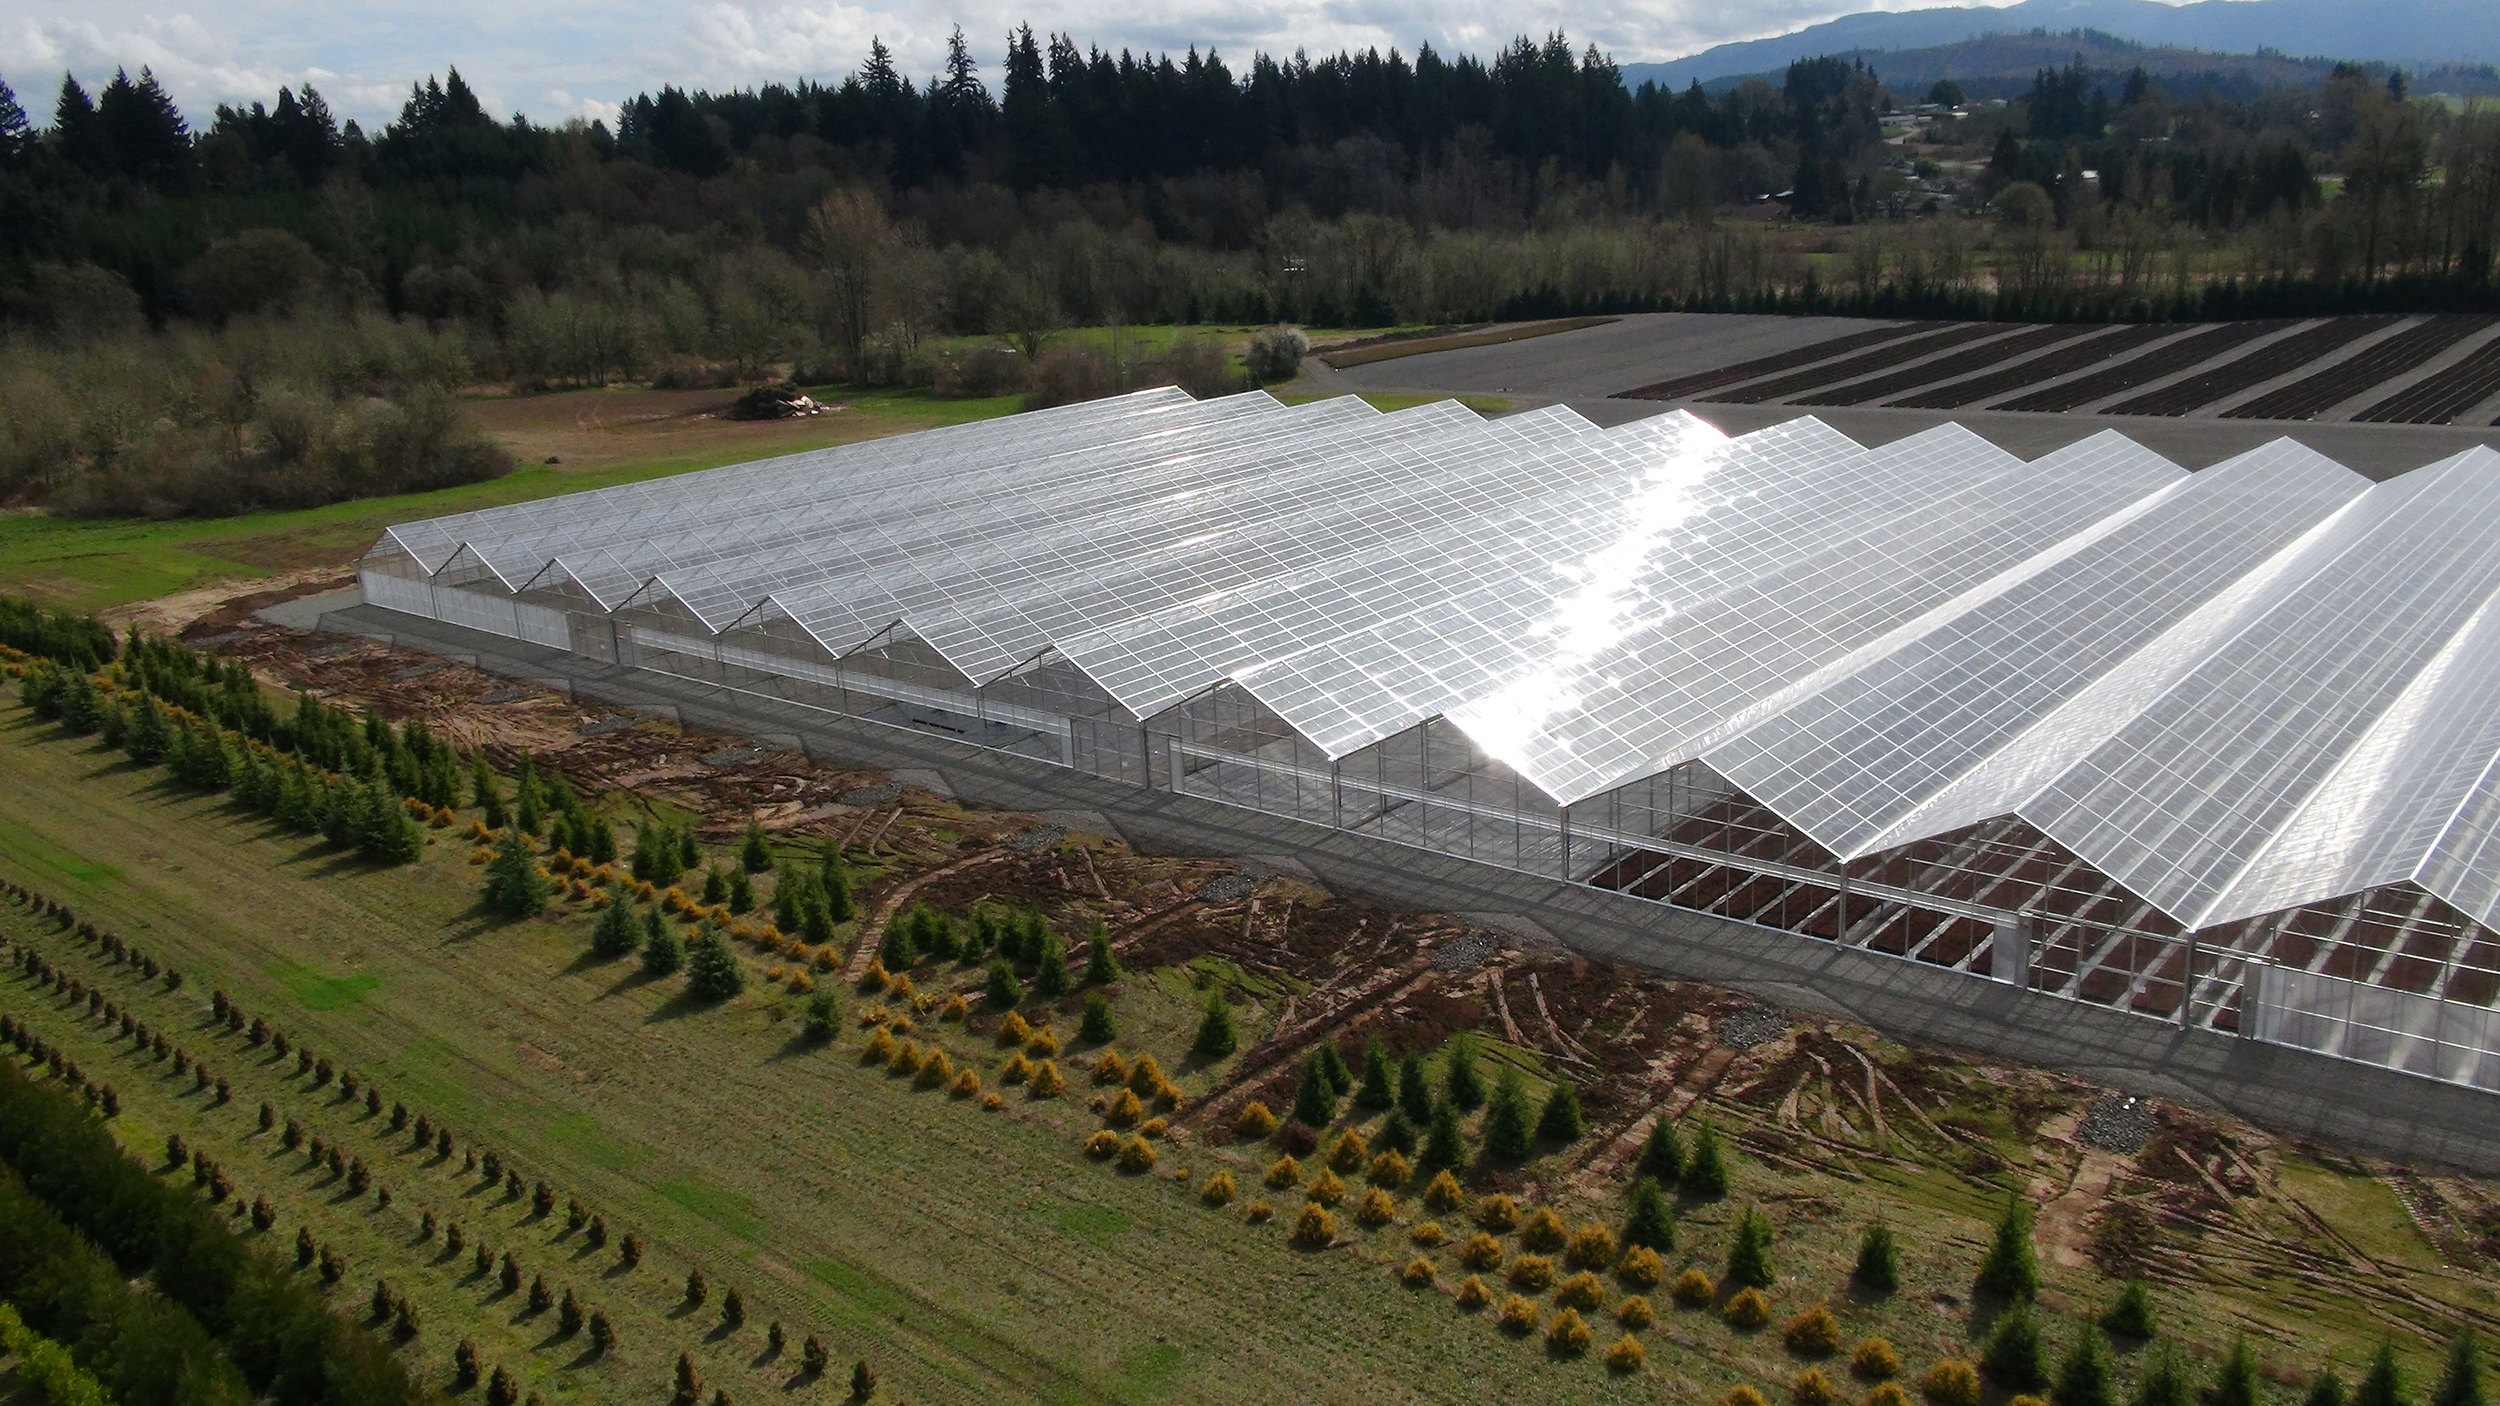 Aerial view of Conley’s Gable Series 7500 Greenhouse Range recently installed at Fall Creek Farm & Nursery in Lowell, OR.  This photo shows phase 1 of 2 of a 7.3 acre sized project.